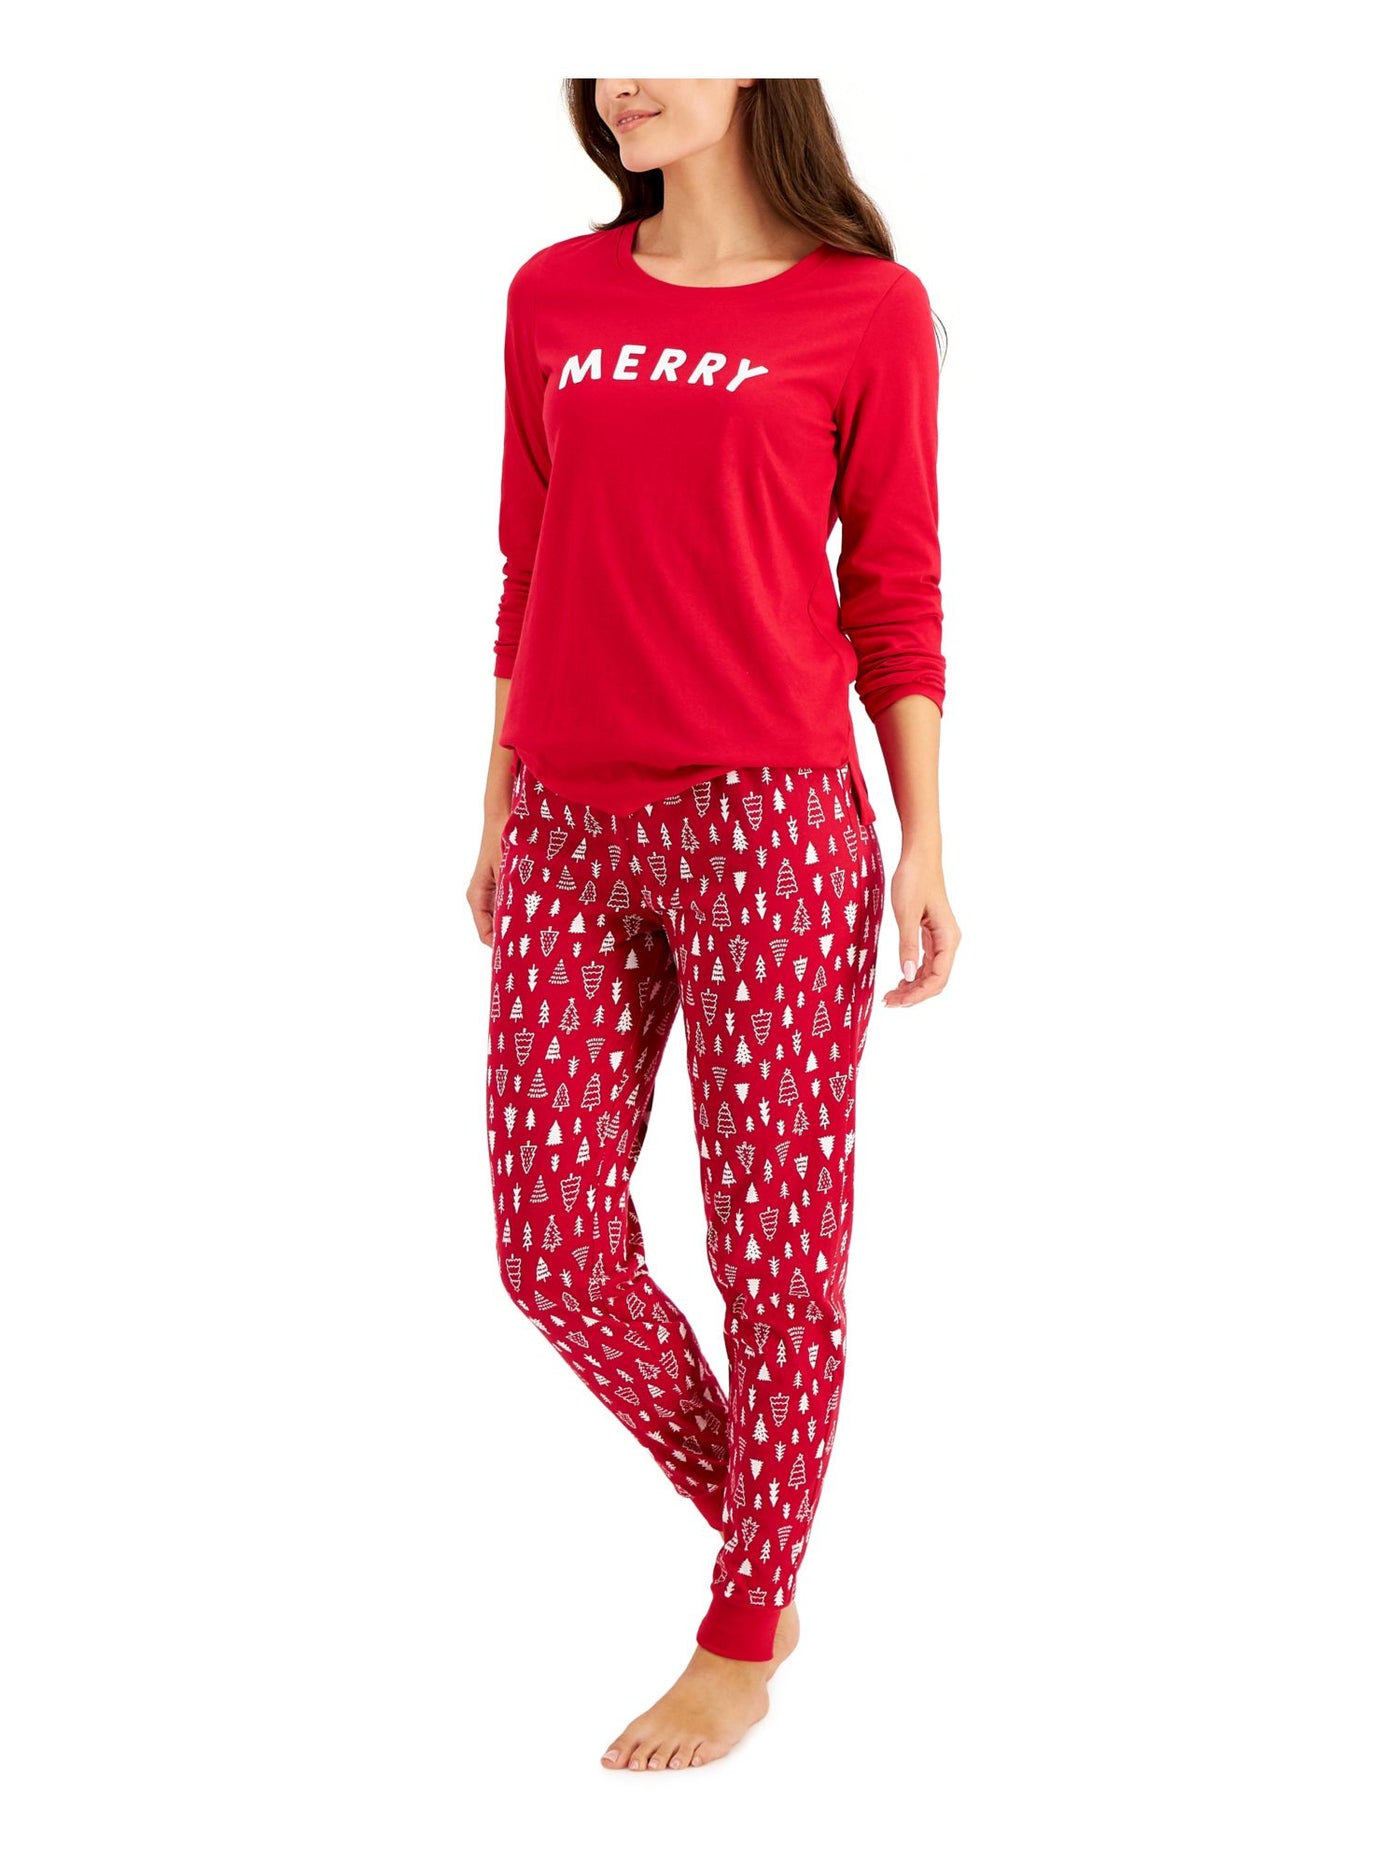 FAMILY PJs Womens Red Graphic Elastic Band T-Shirt Top Cuffed Pants Pajamas M